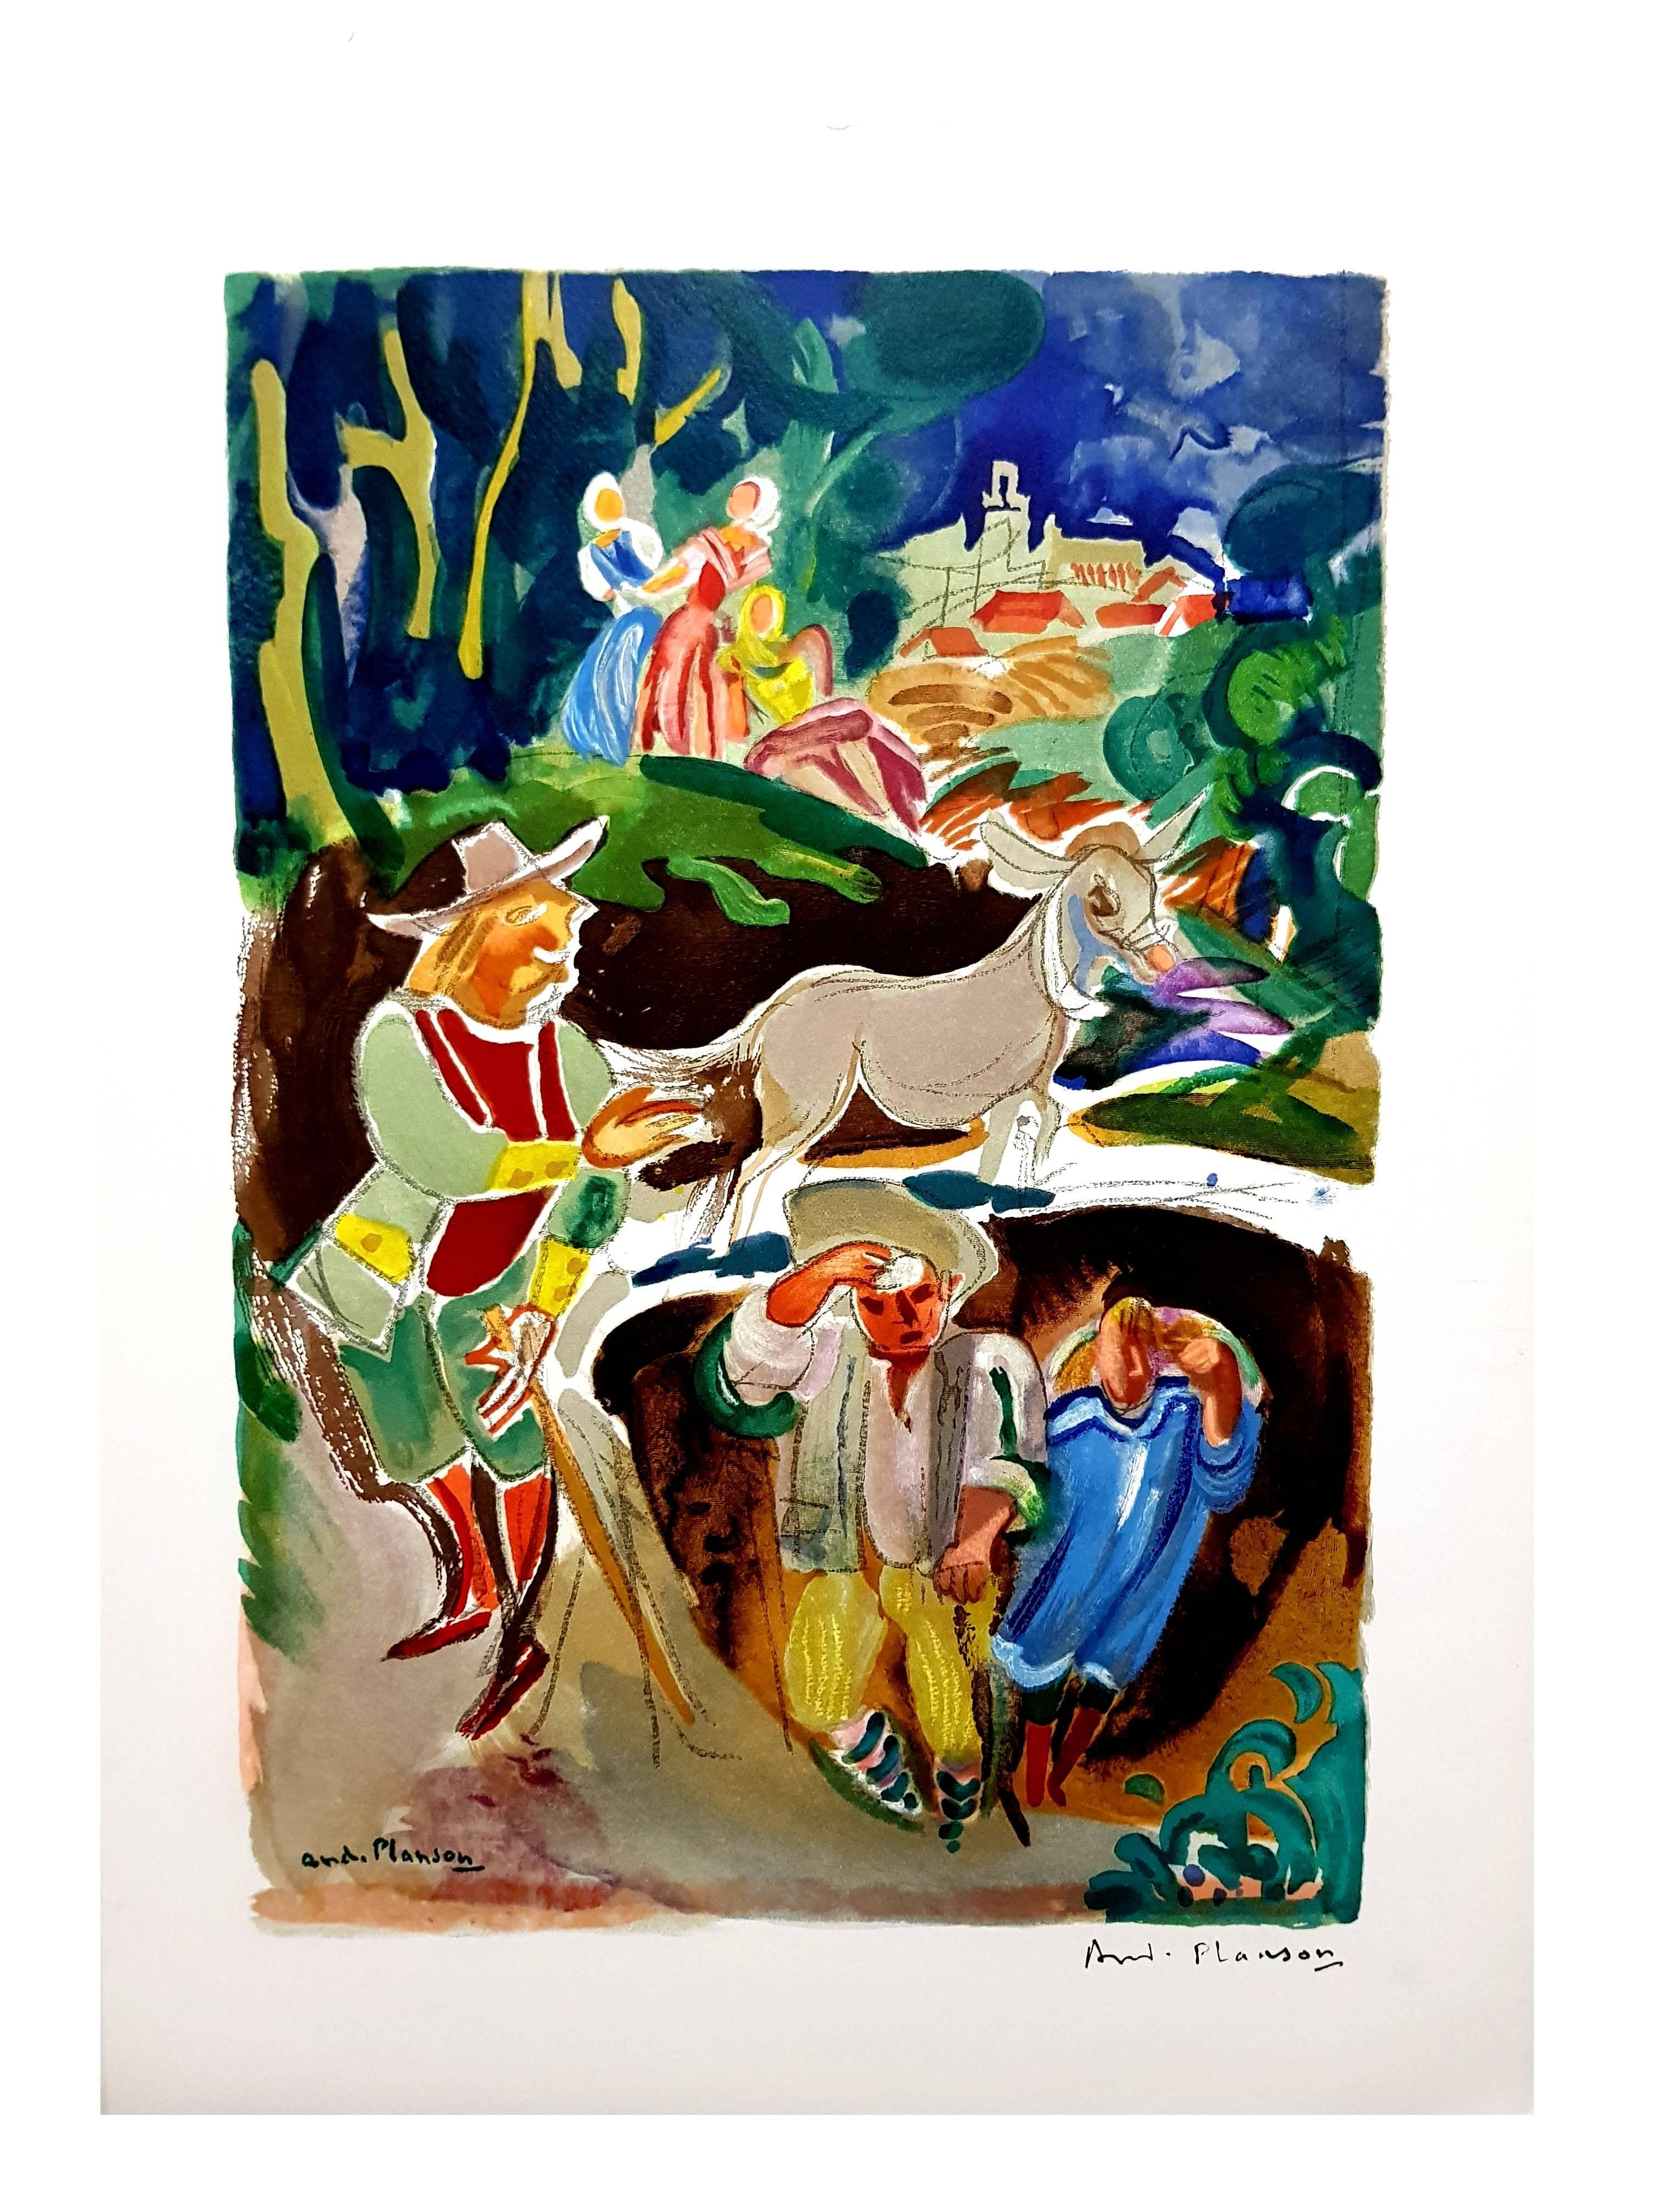 André Planson - French Province 
Original Lithograph
Handsigned 
Dimensions: 38 x 28 cm


Leonor Fini is considered one of the most important women artists of the mid-twentieth century, along with Leonora Carrington, Frida Kahlo, Meret Oppenheim,